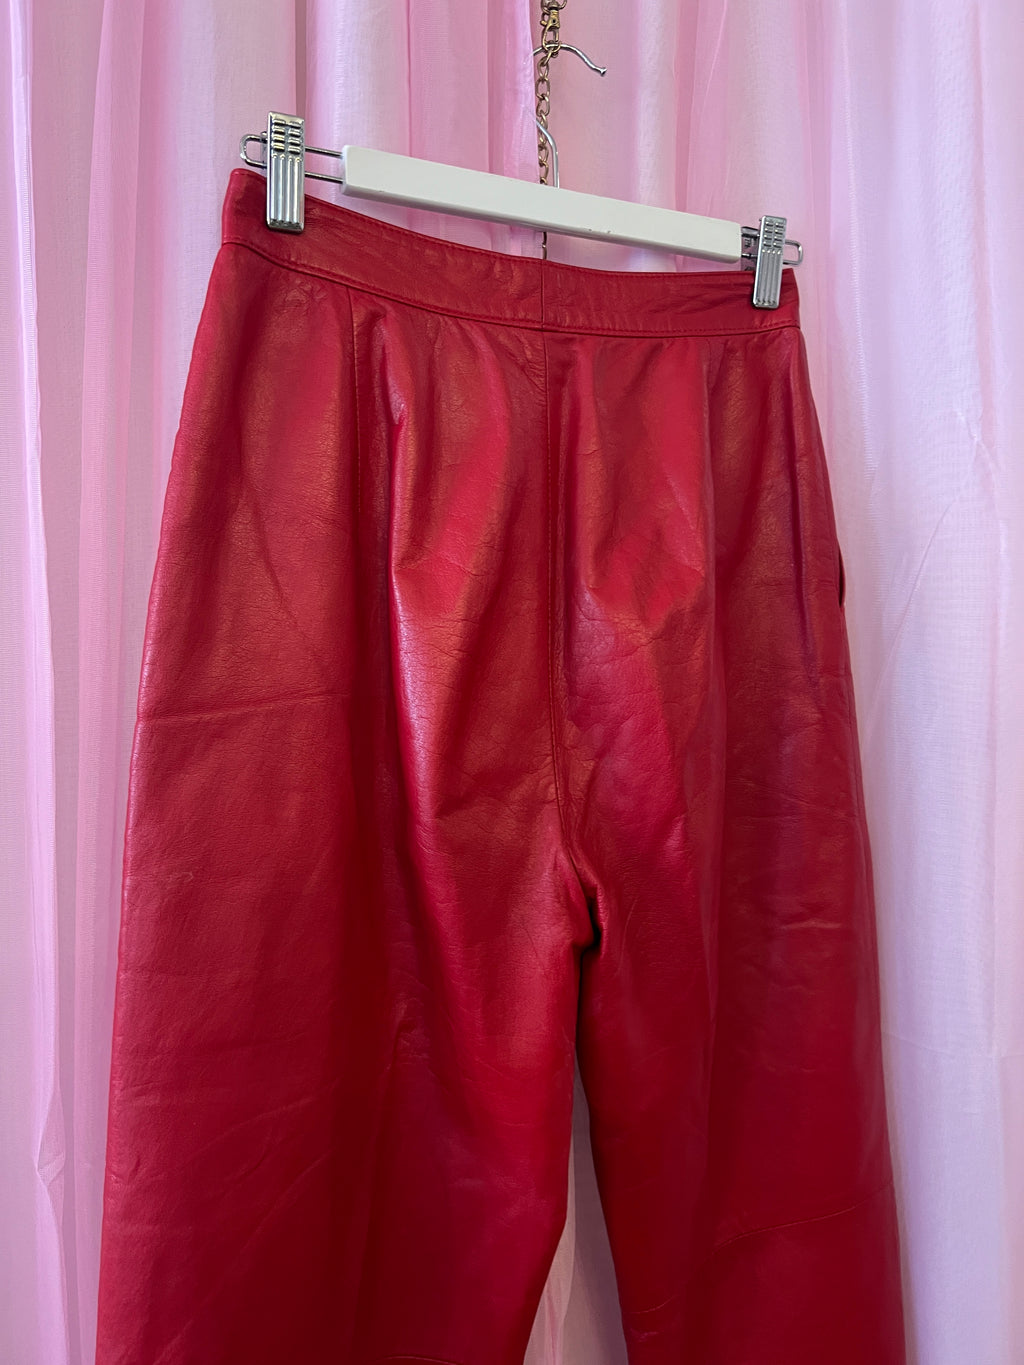 Vintage Red Leather Pants